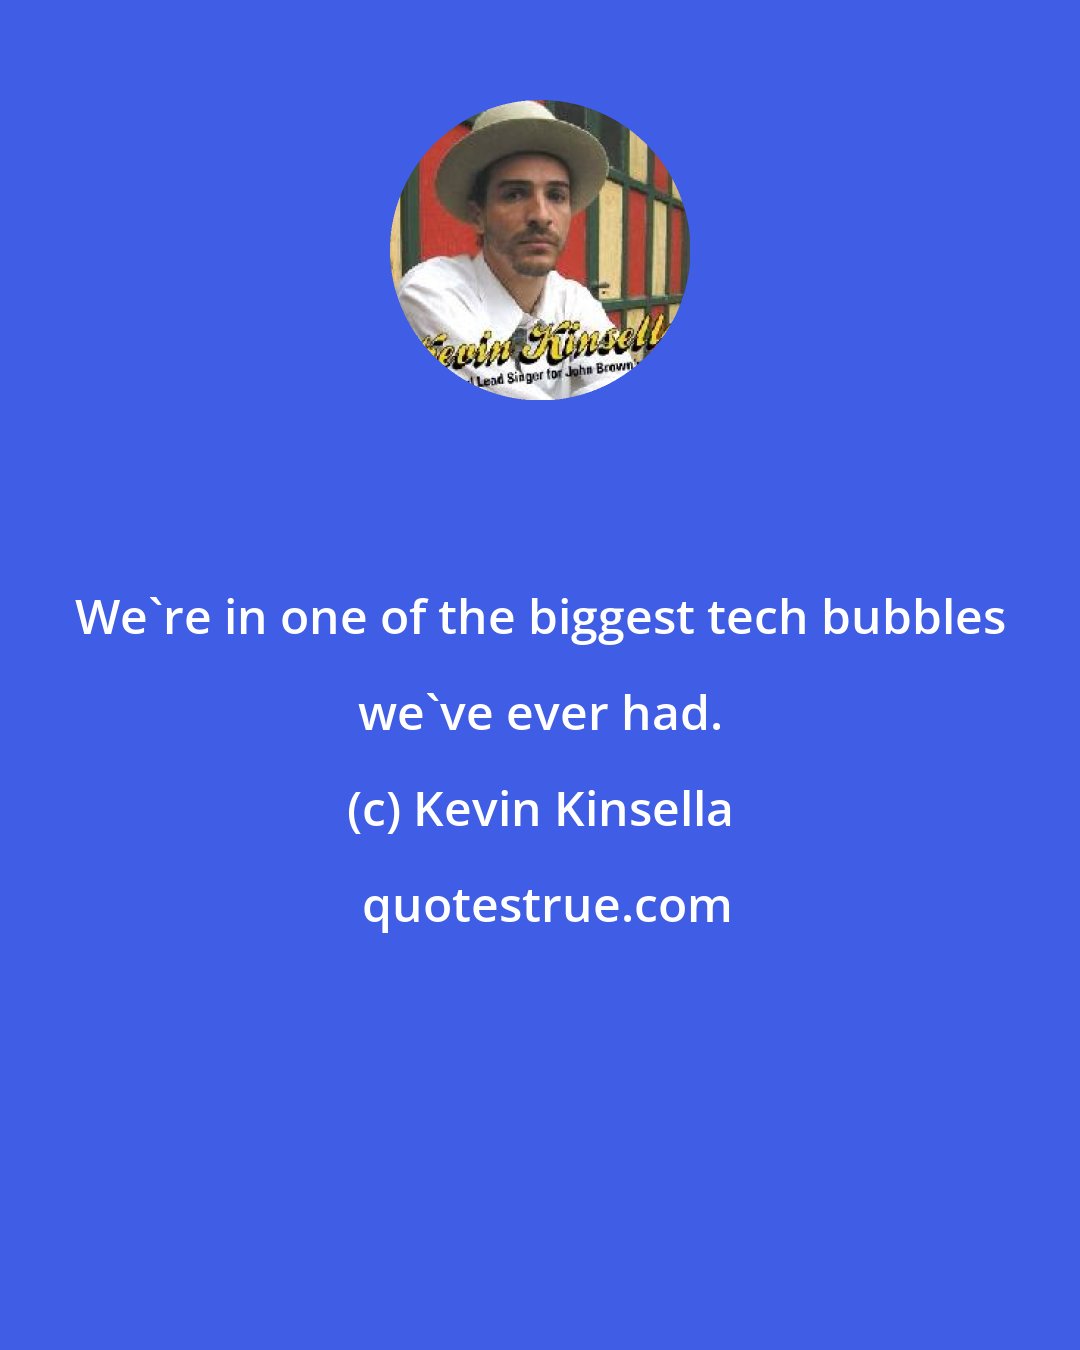 Kevin Kinsella: We're in one of the biggest tech bubbles we've ever had.